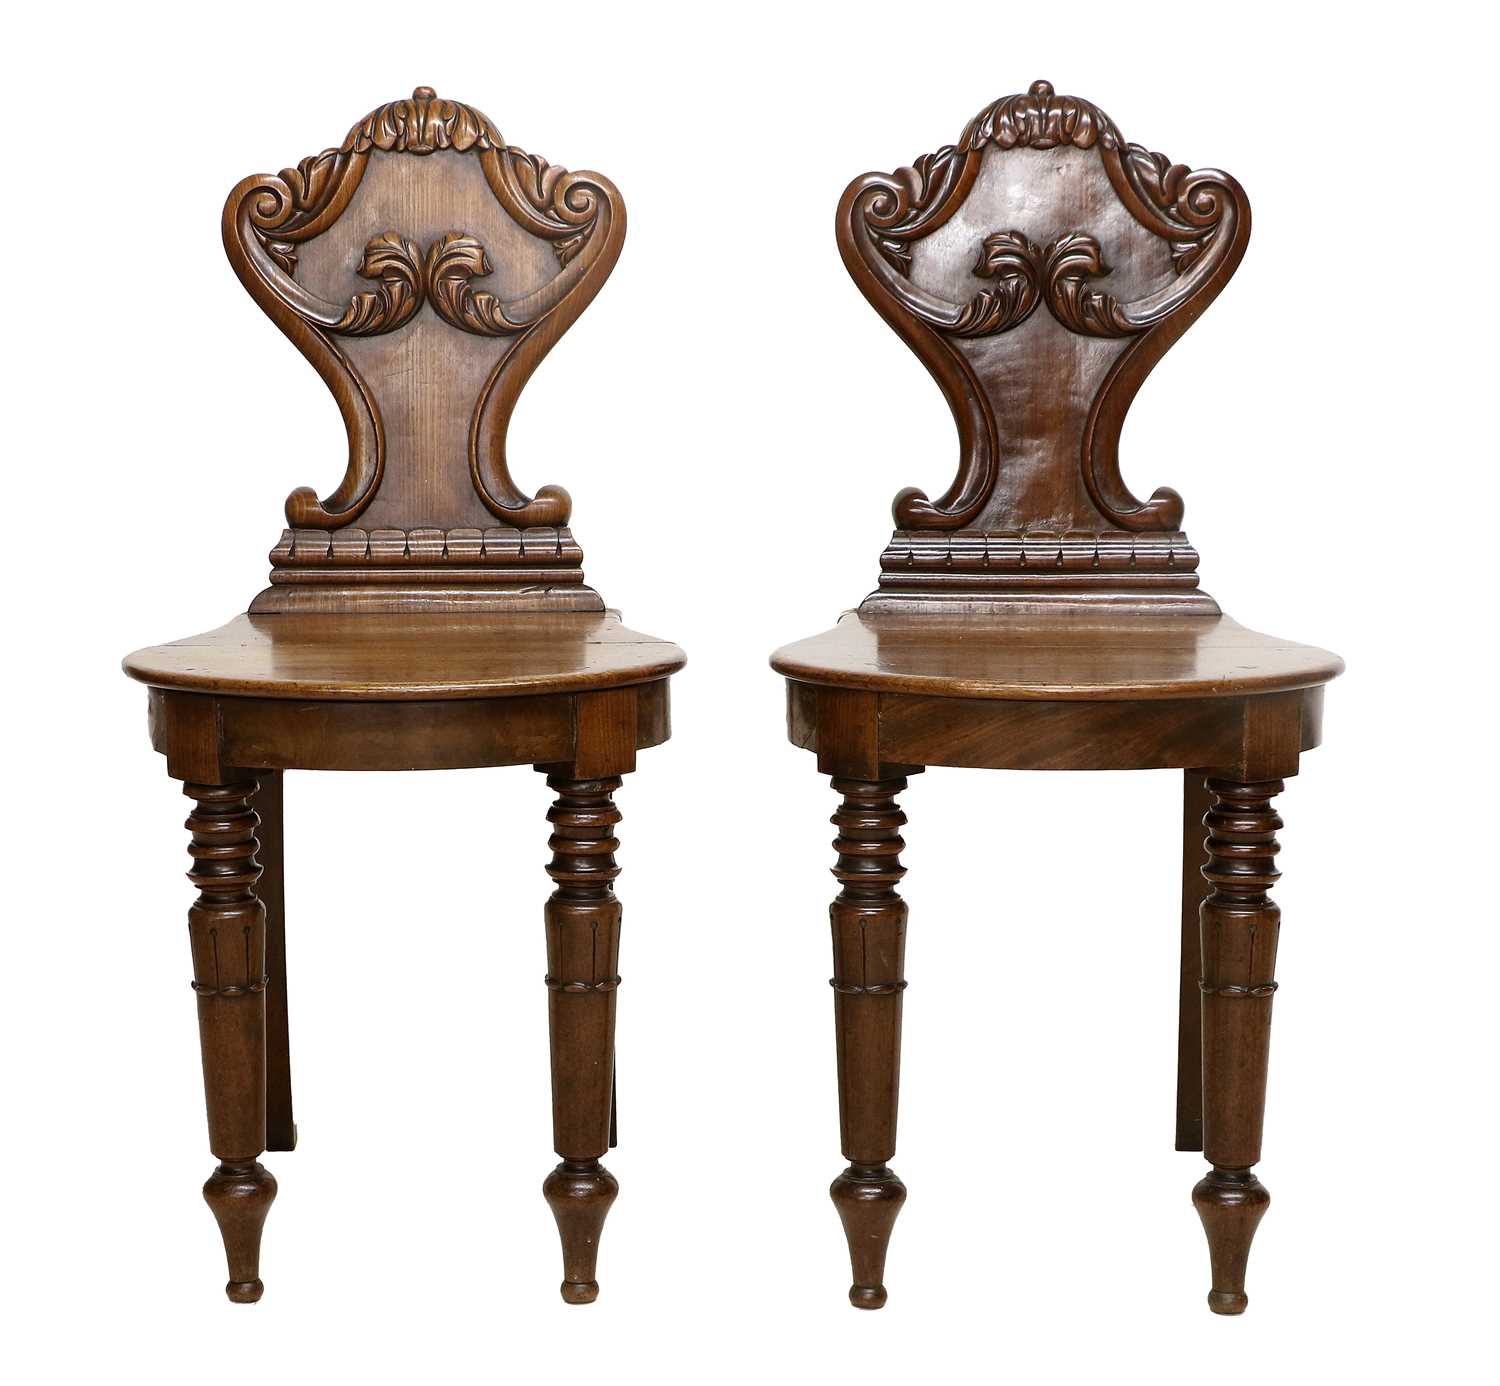 A Pair of William IV Carved Mahogany Hall Chairs, 2nd quarter 19th century, the acanthus leaf-carved - Image 2 of 2